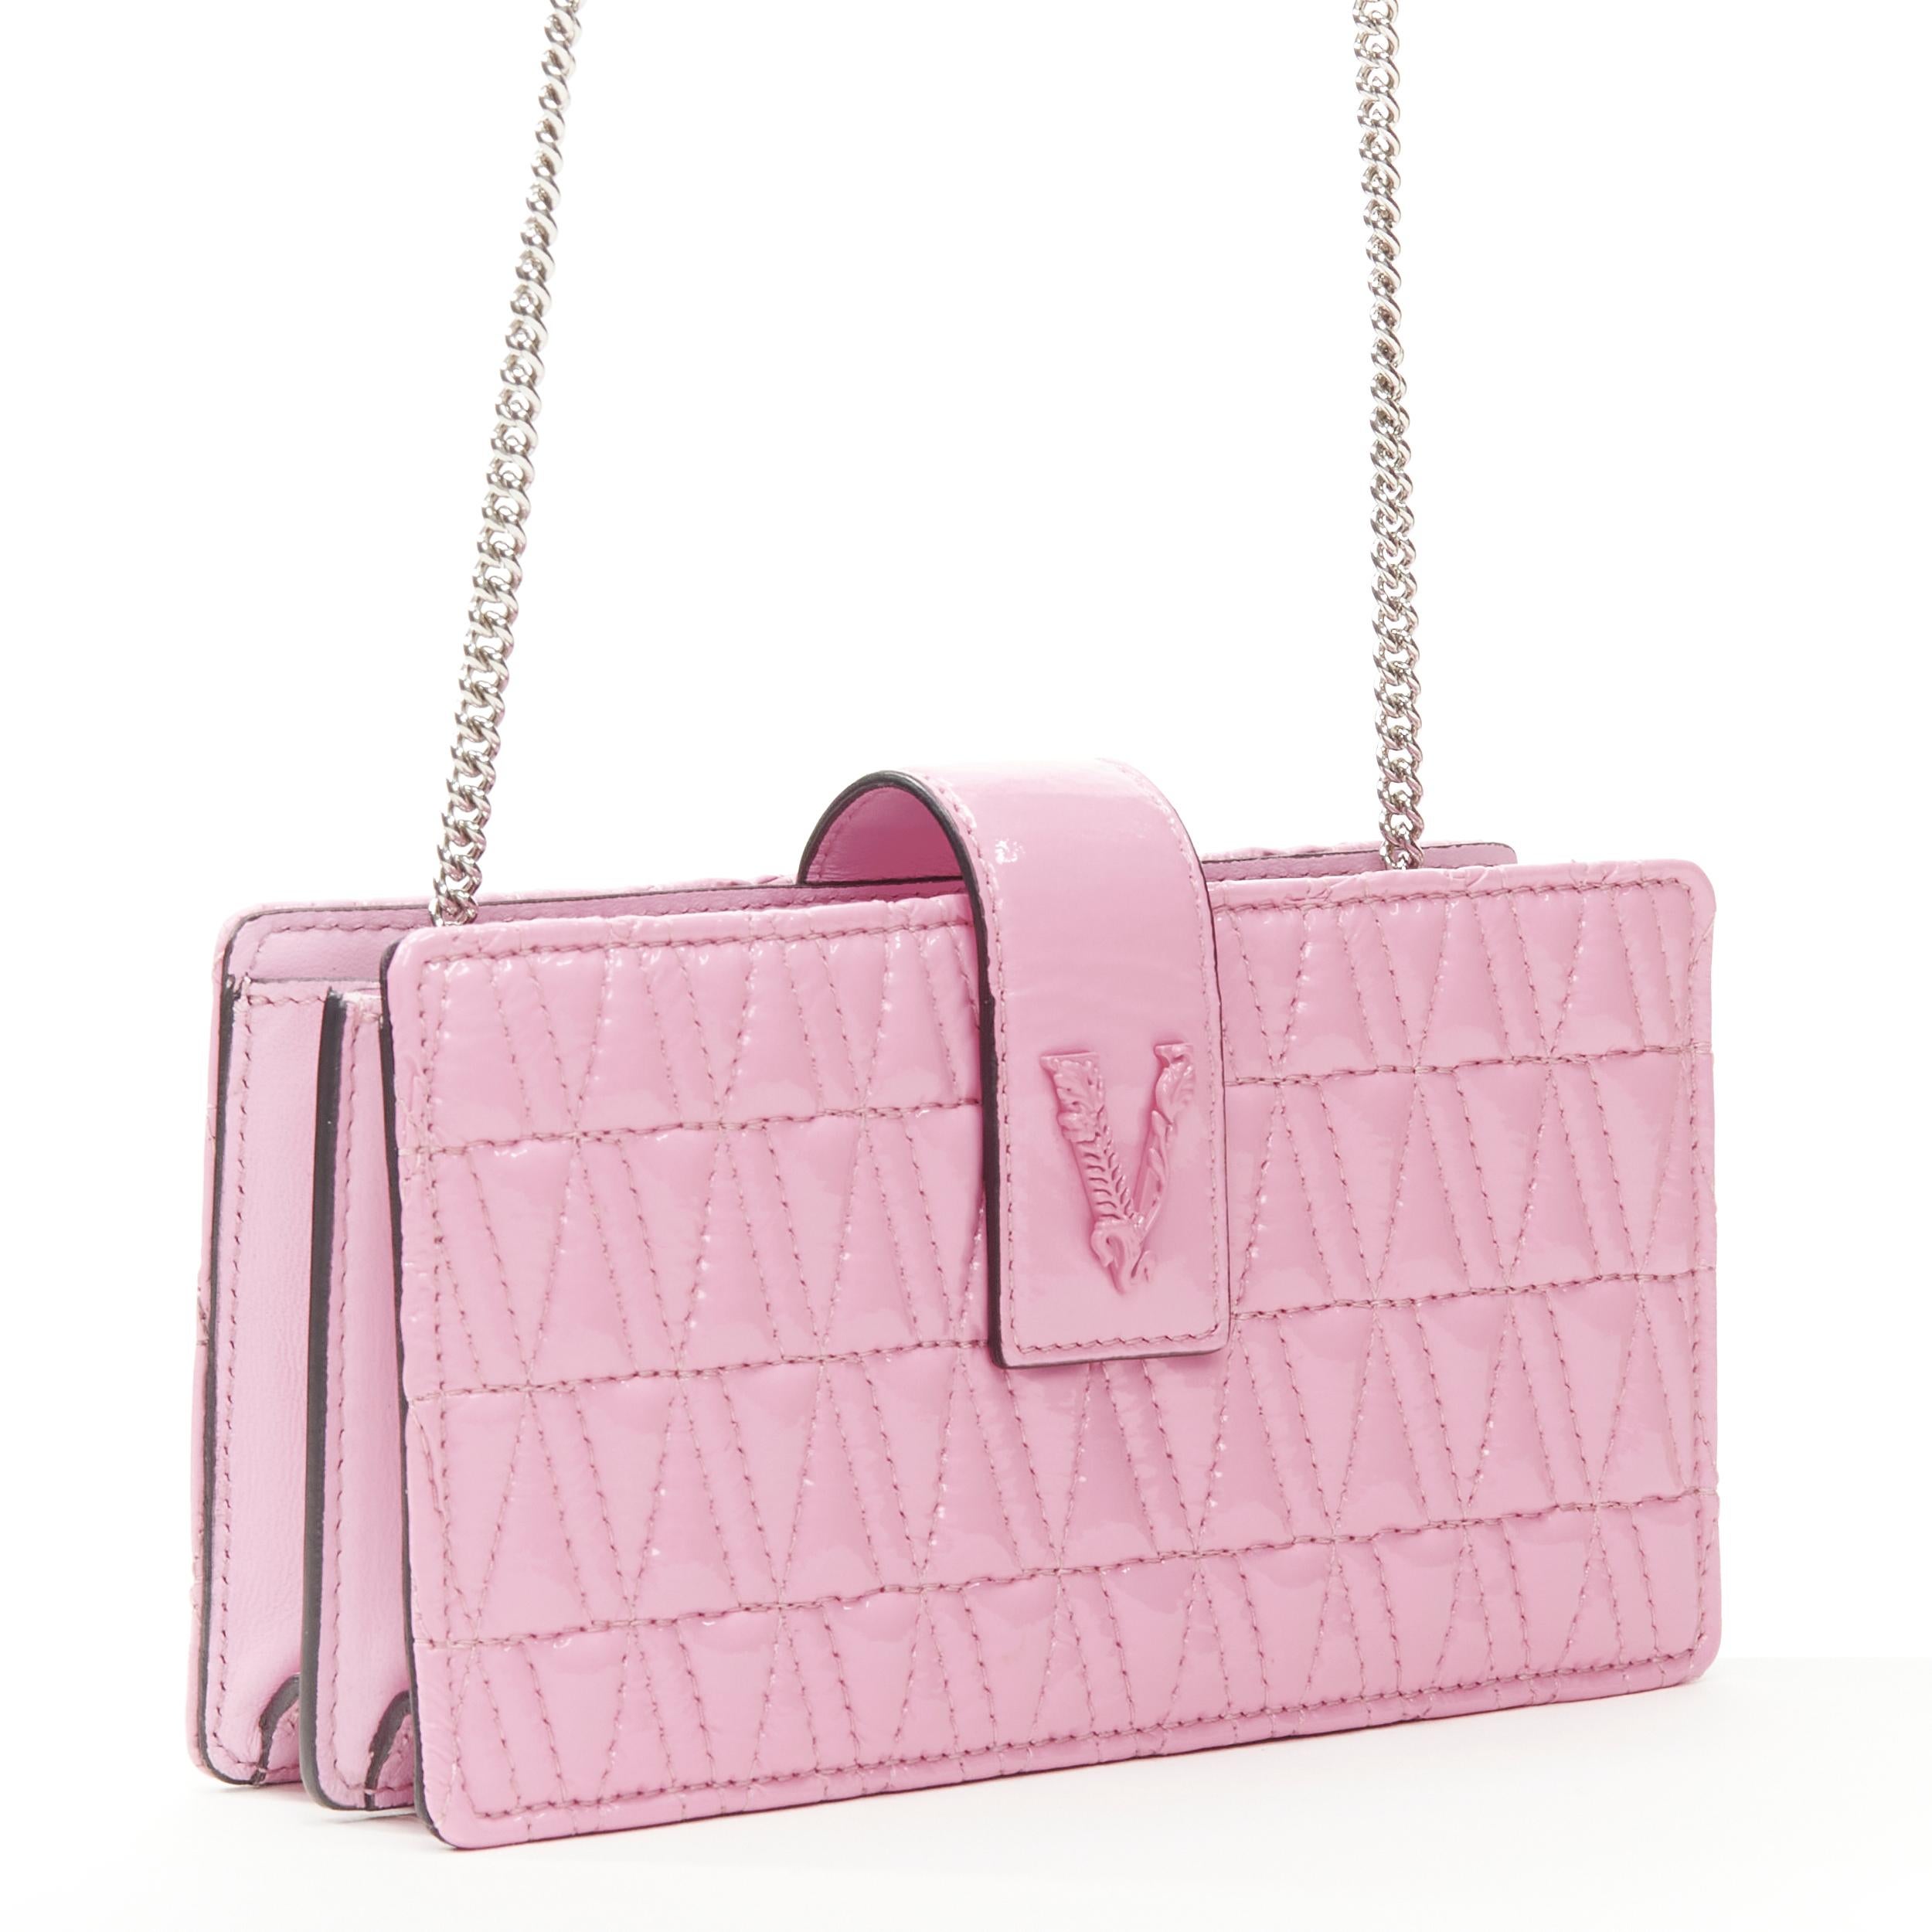 Pink new VERSACE Virtus pink patent leather Barocco V quilted crossbody chain bag